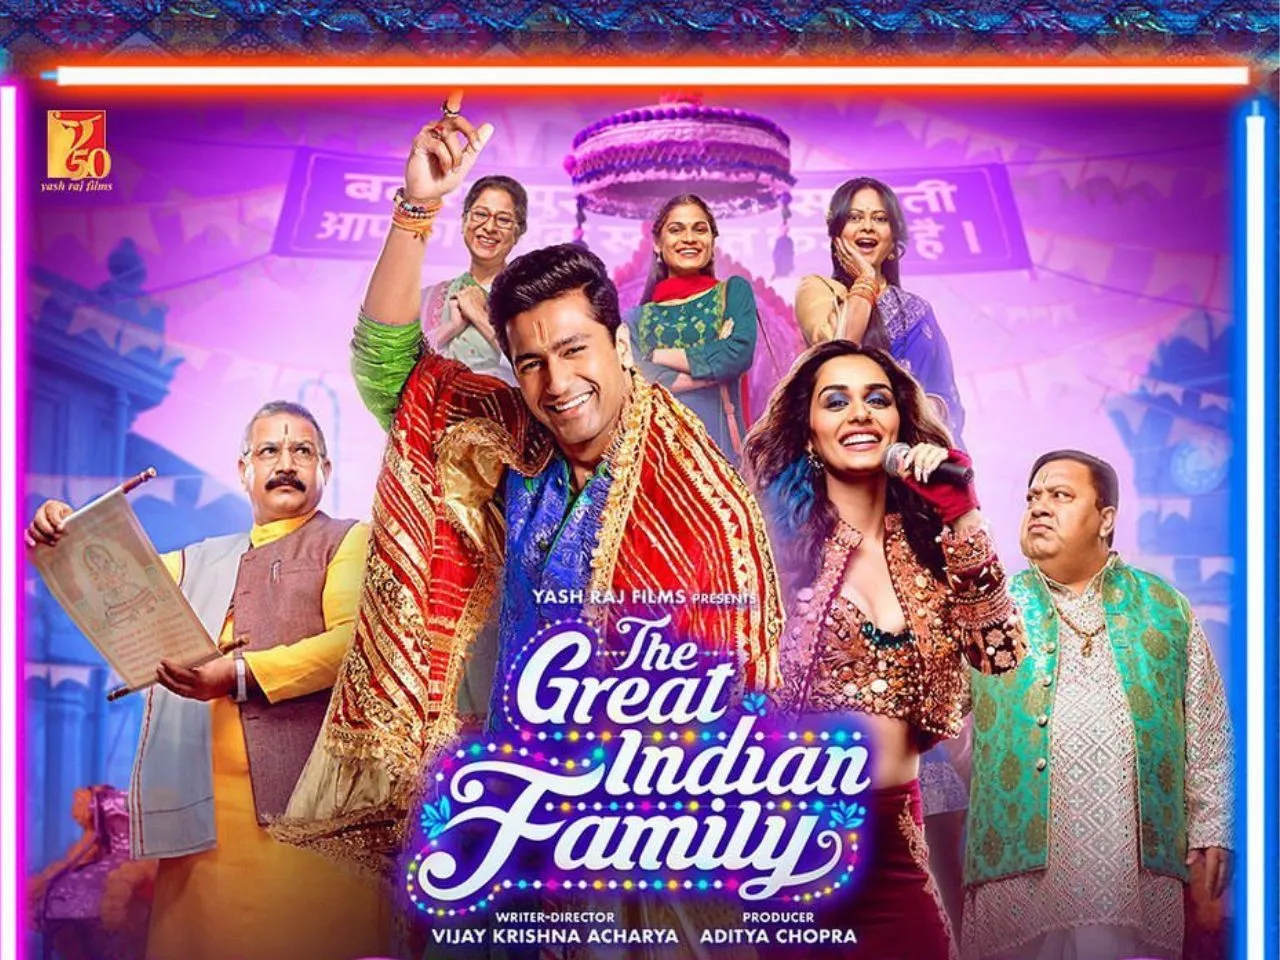 The Great Indian Family review: Predictable but fun and simple with genuine sociopolitical message